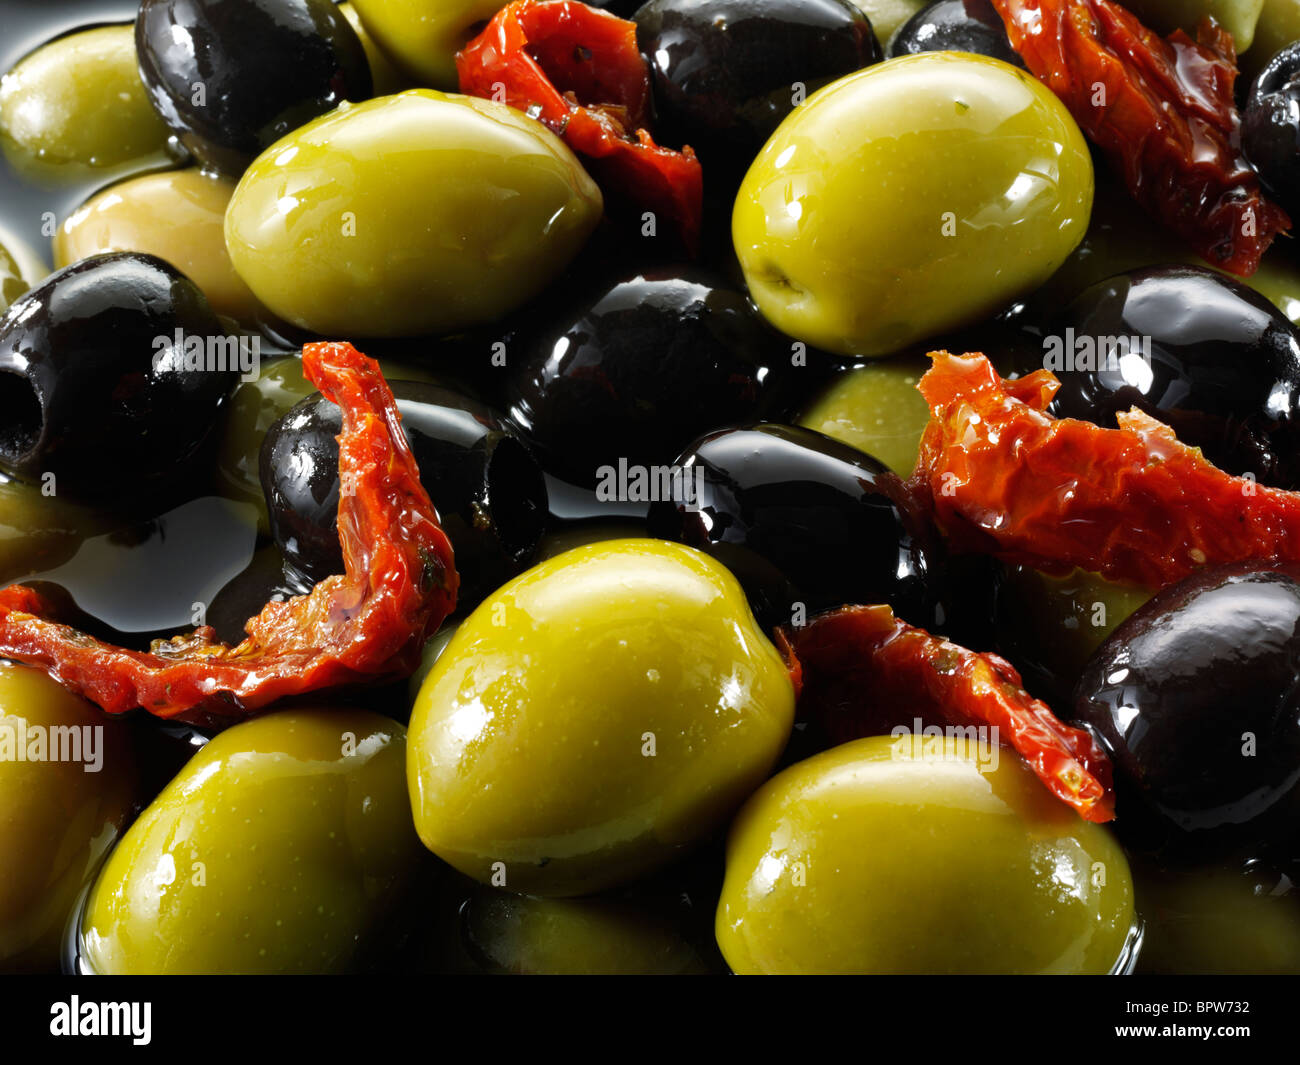 Fresh mixed black and green olives photos, pictures & images. Stock Photo